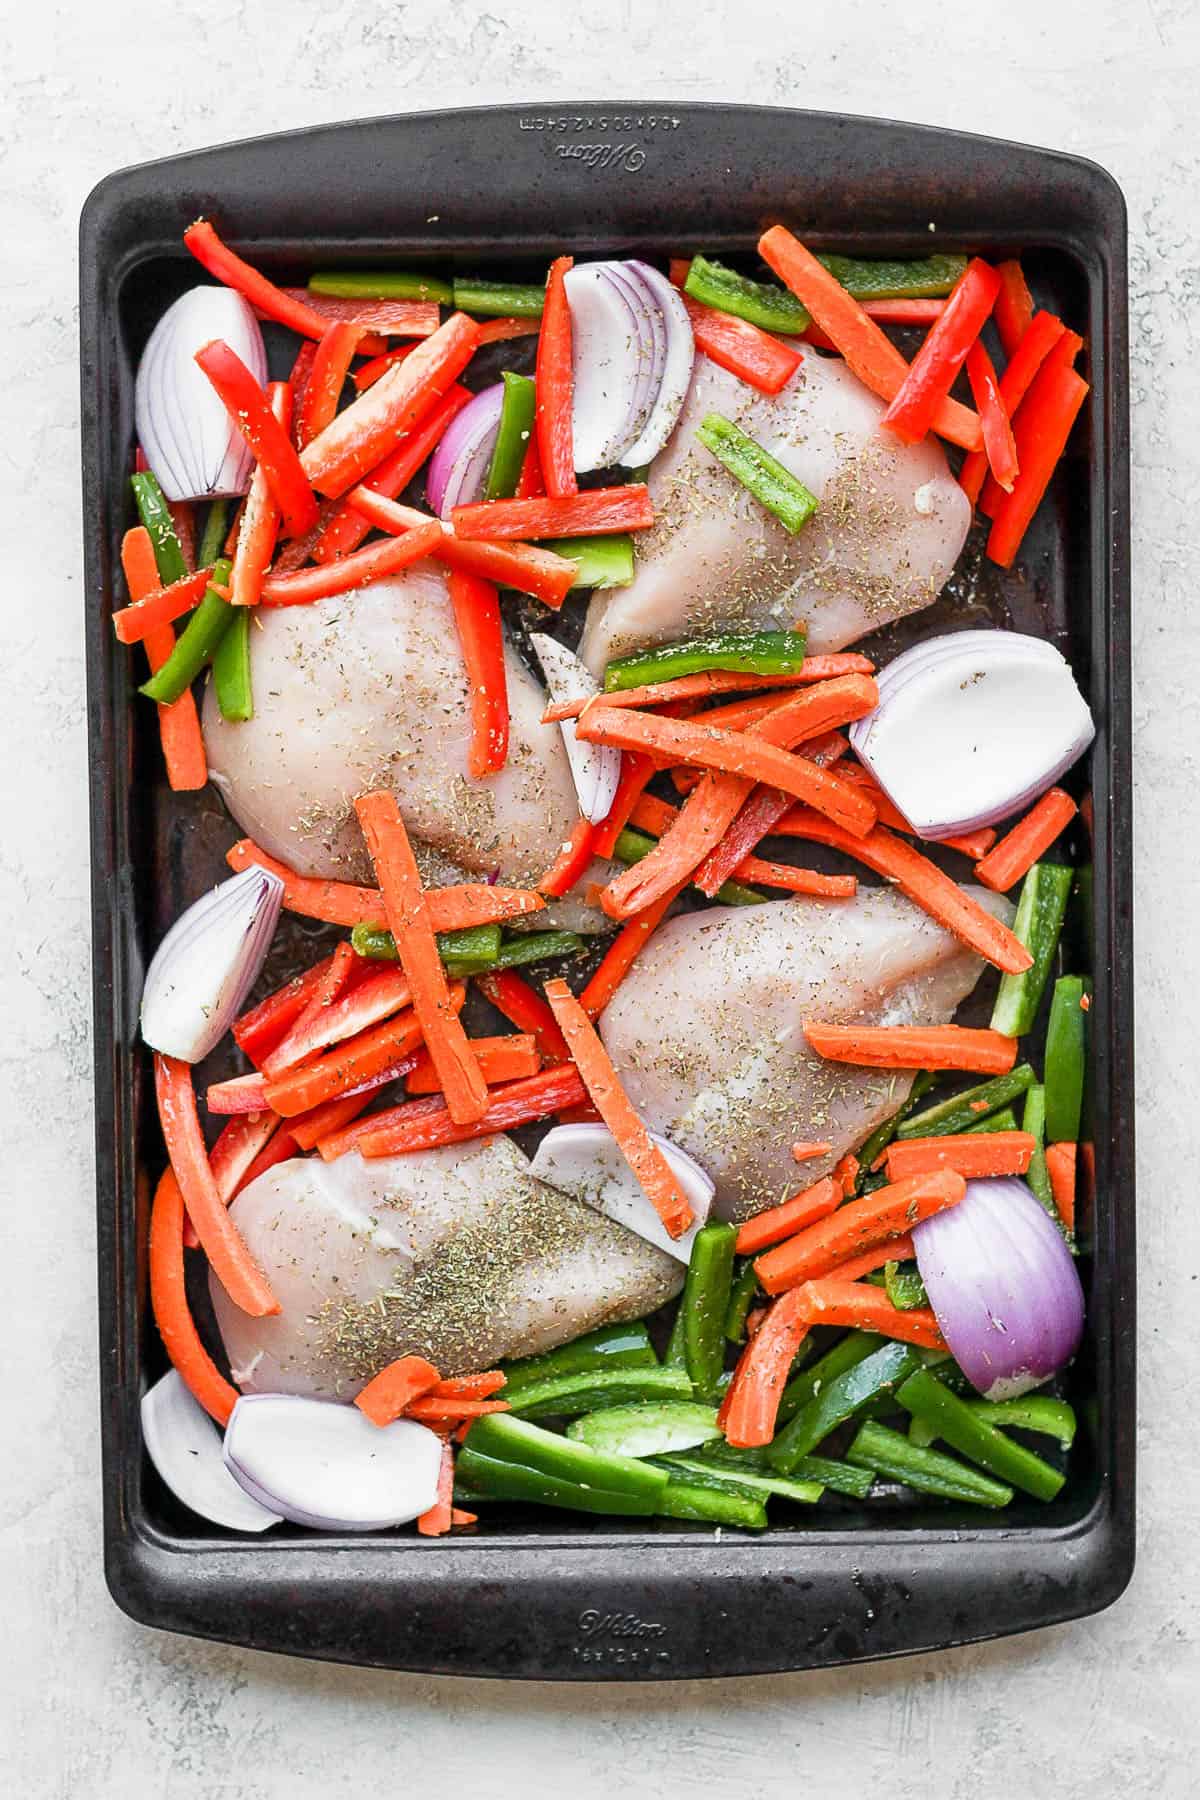 Sheet pan with ingredients before cooking